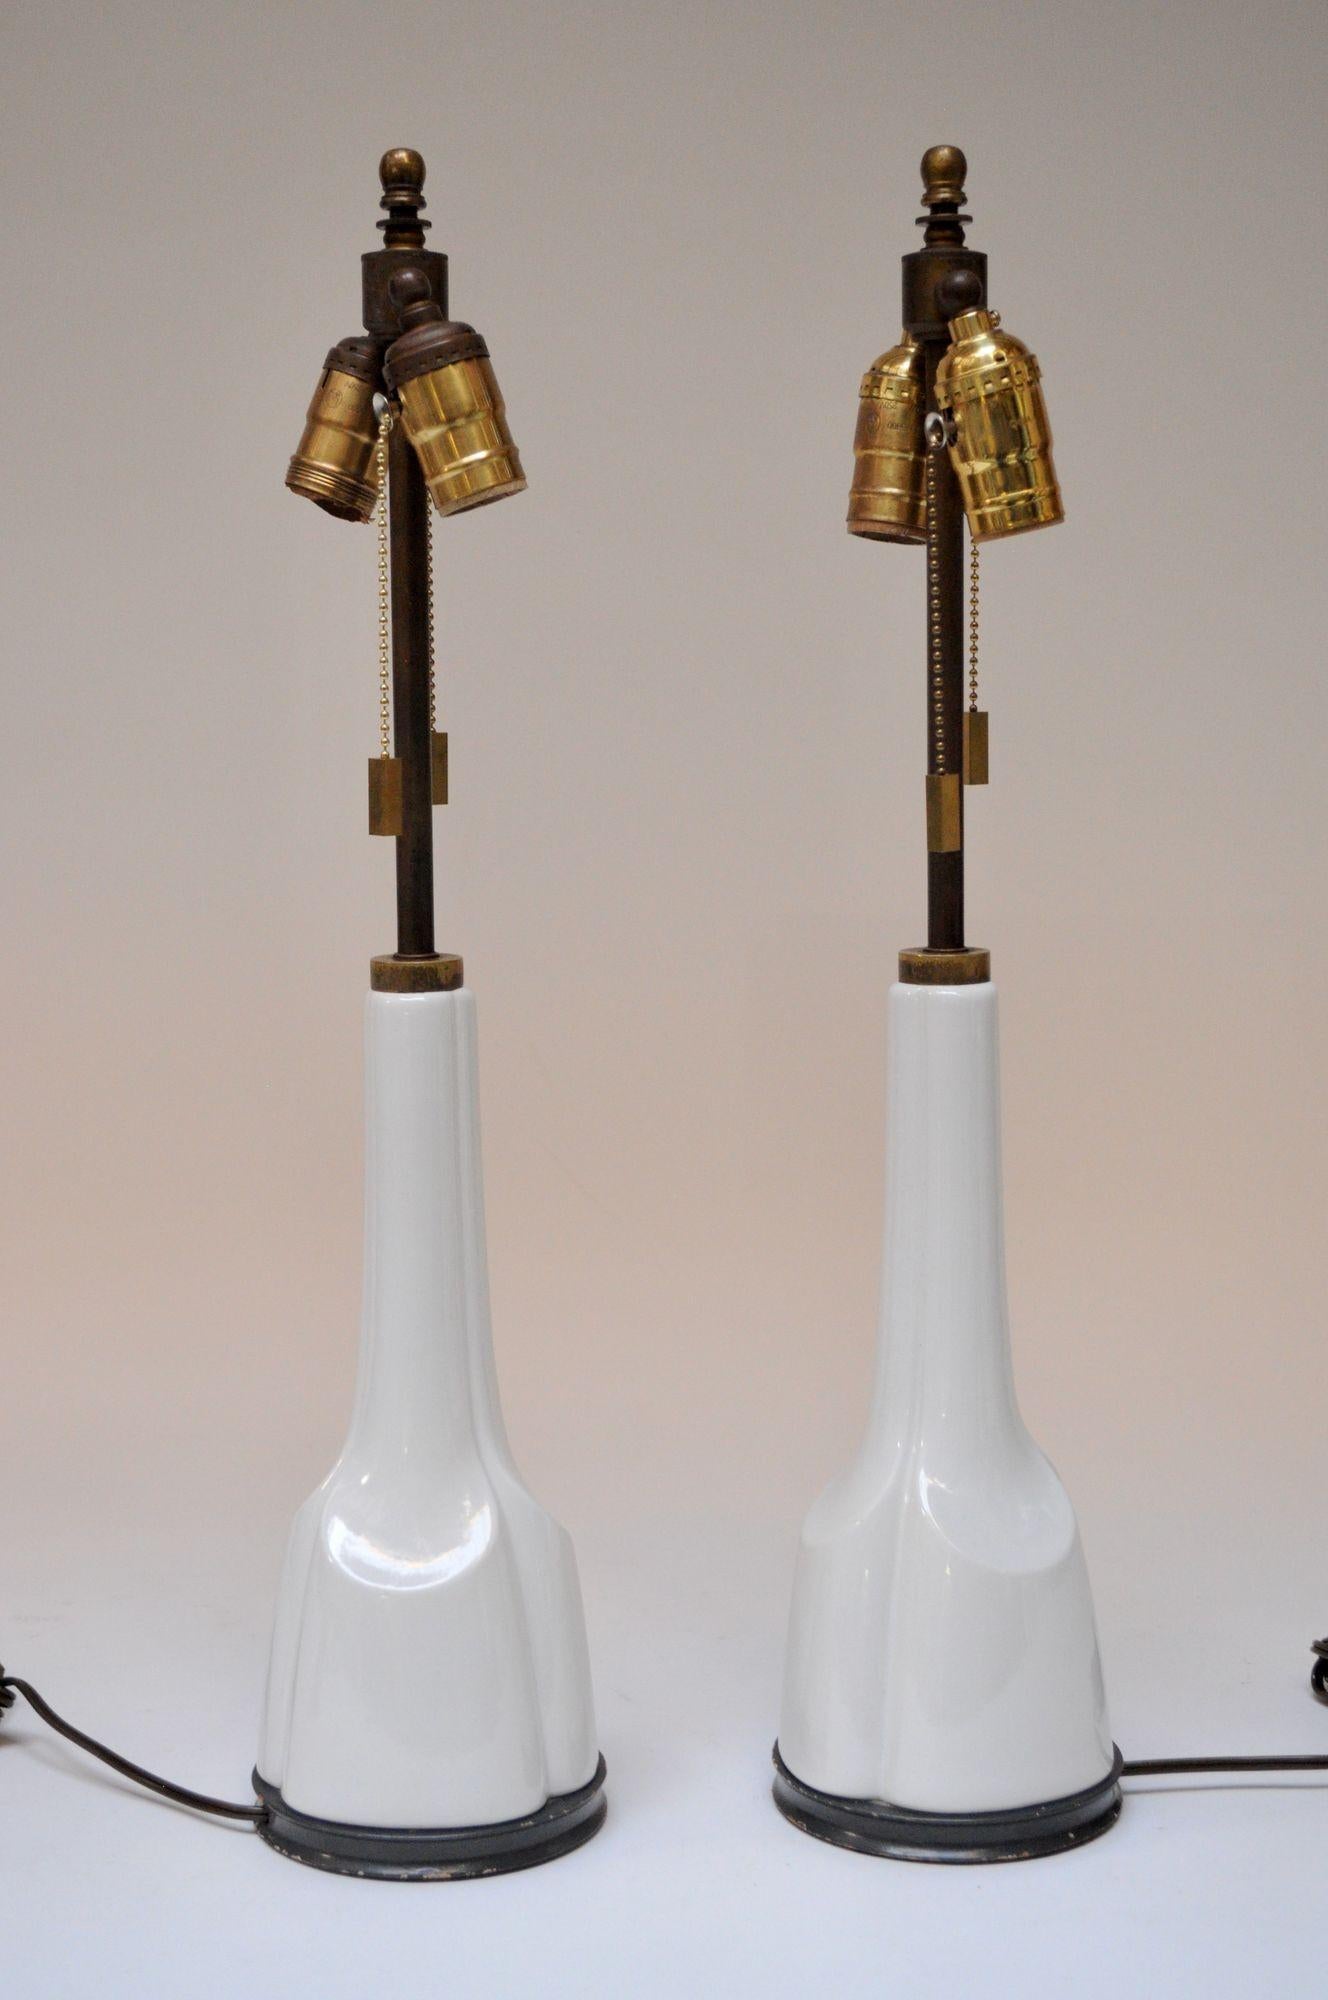 Pair of Mid-Century American Modern tables lamps (ca. 1950s, USA). Composed of patinated brass stems and white porcelain forms, all supported by ebonized wooden platform bases. Along with the wiring, the dual brass sockets and on/off pull strings